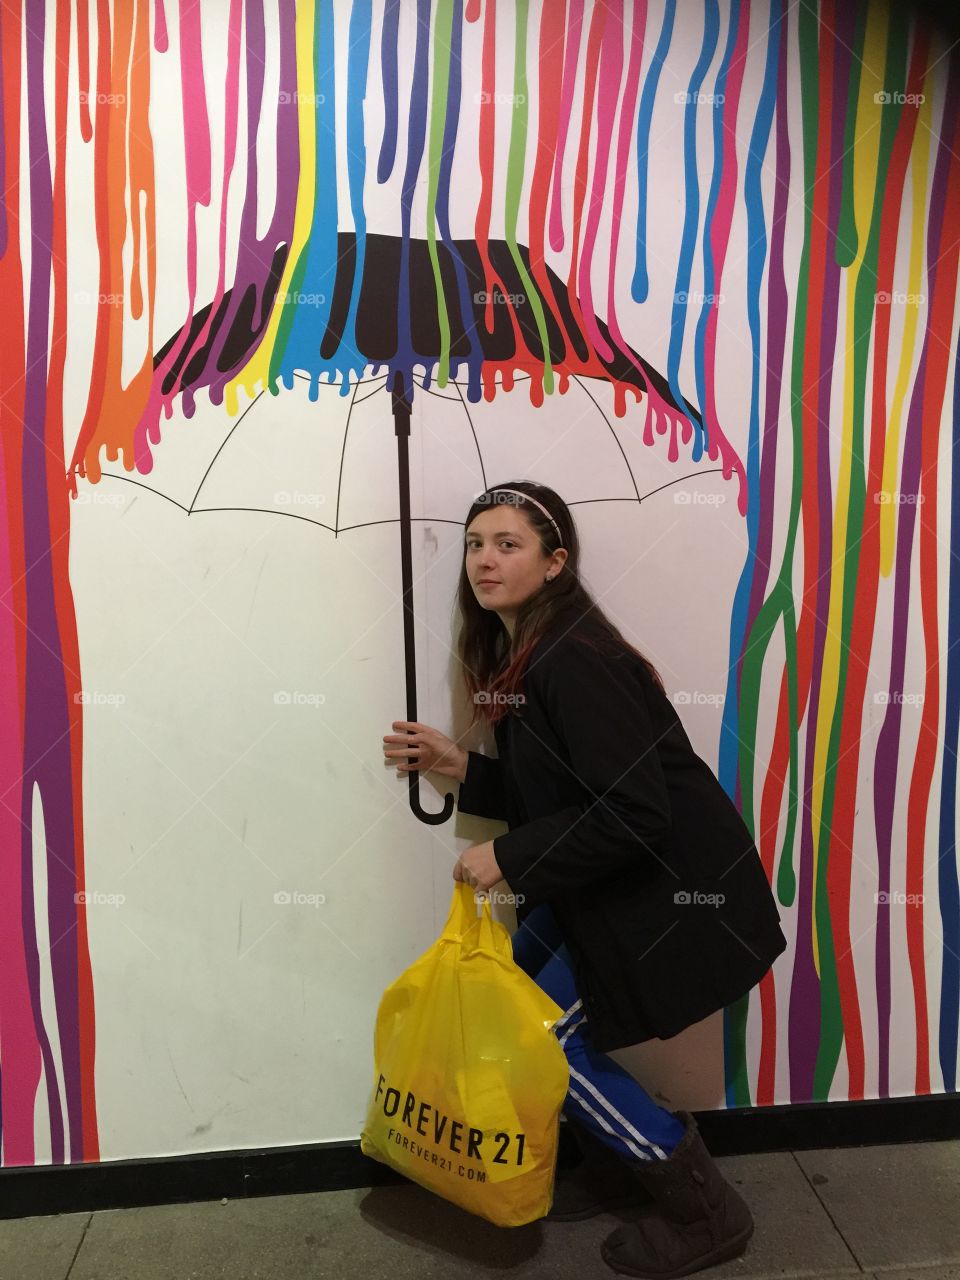 Woman holding umbrella in painting